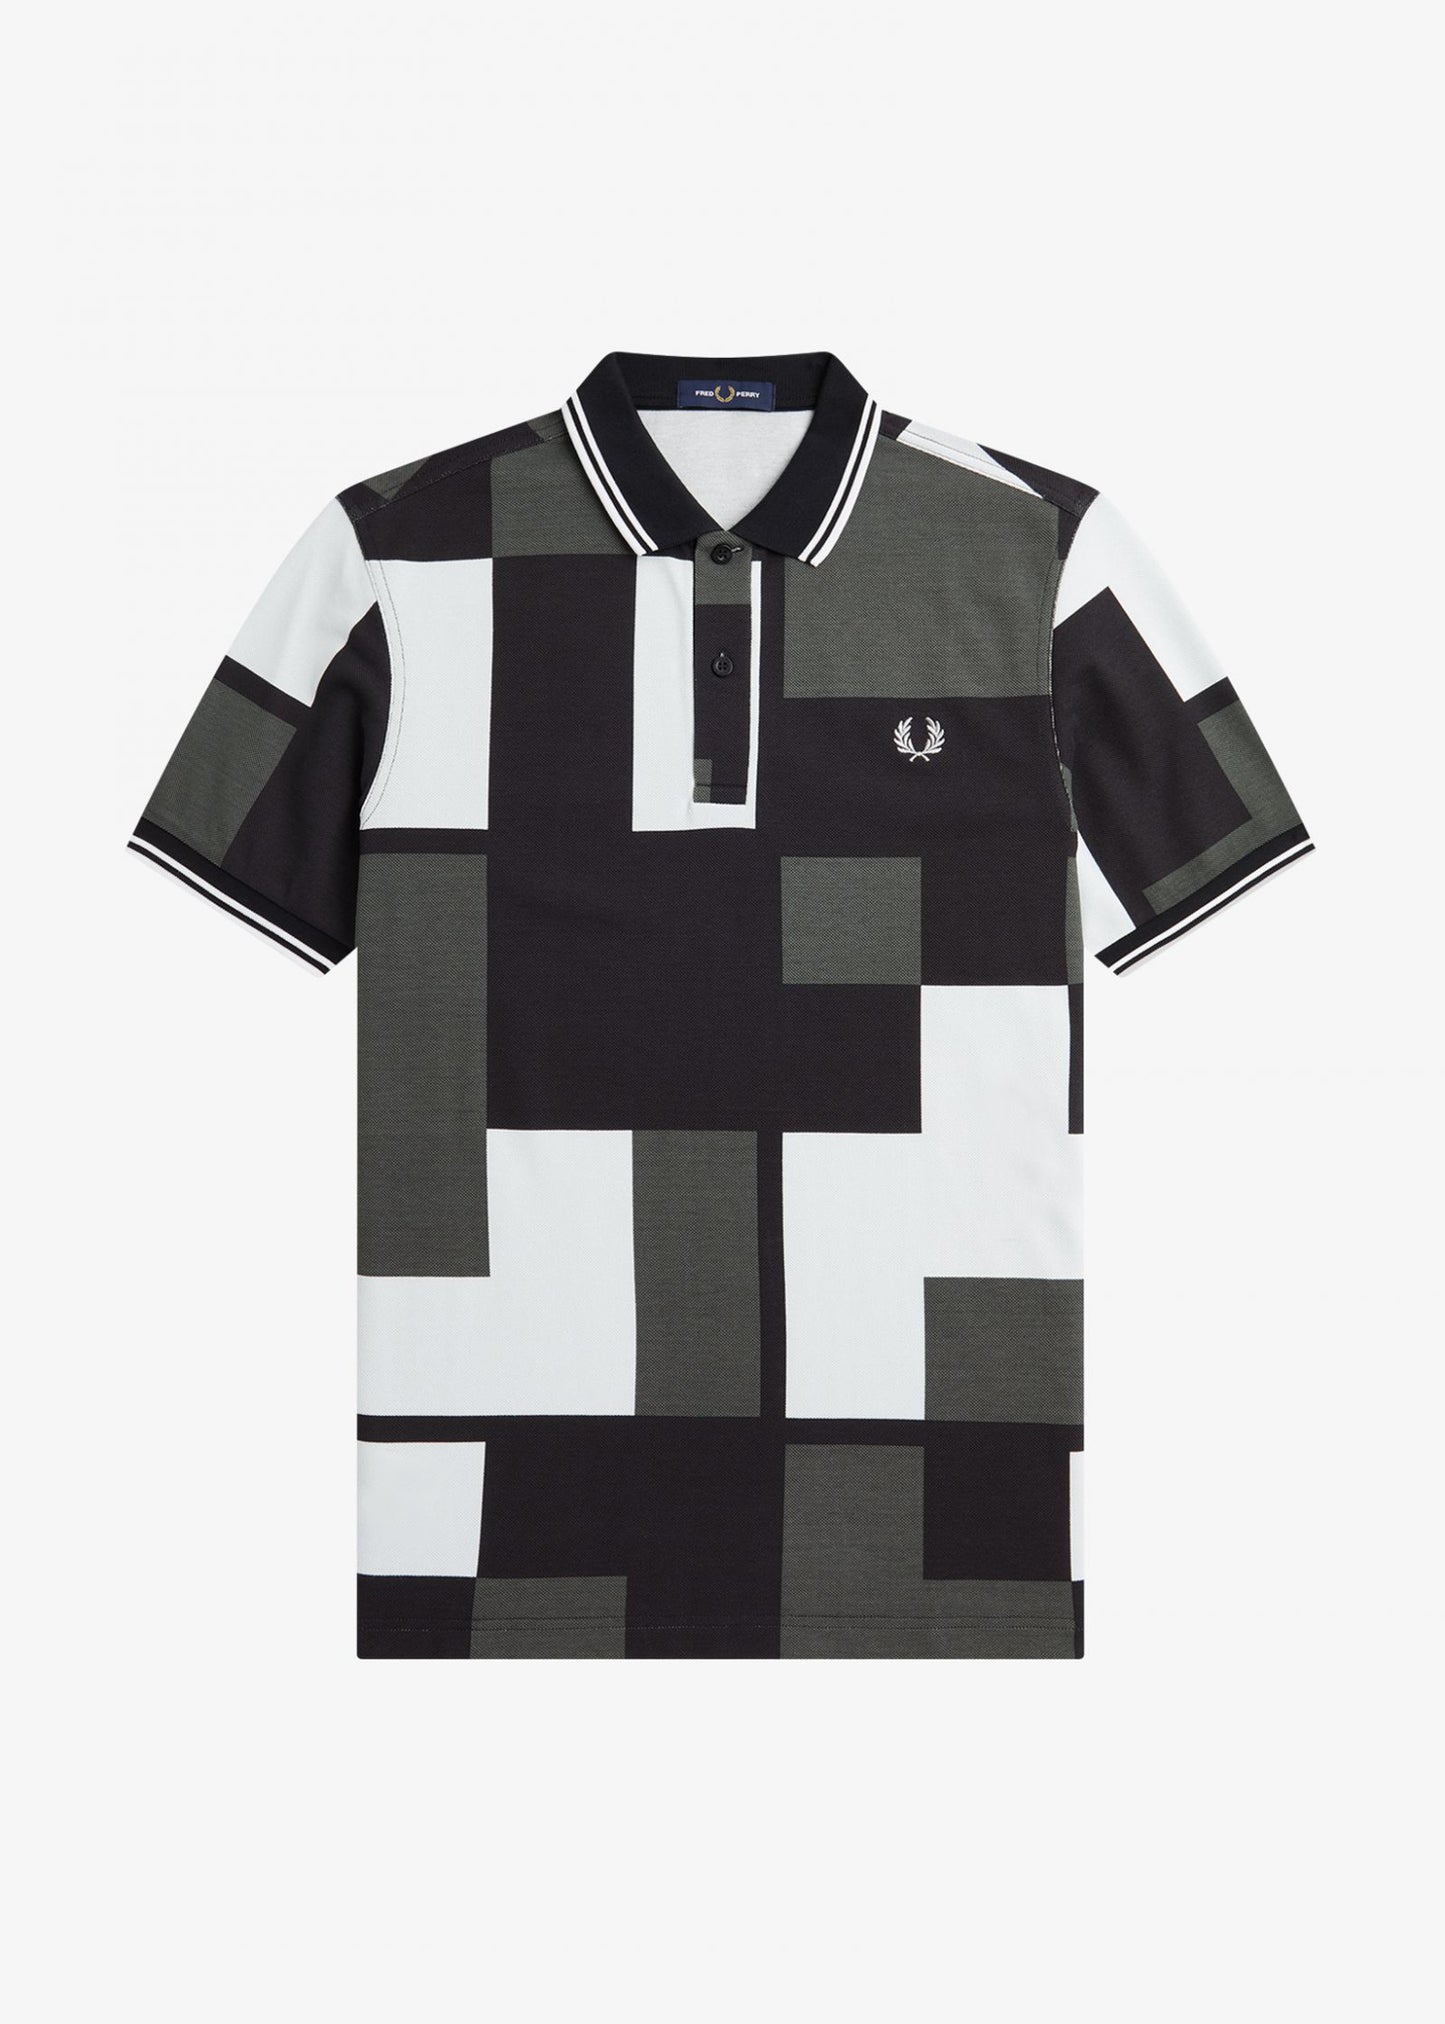 Pixel print fred perry shirt - light ice